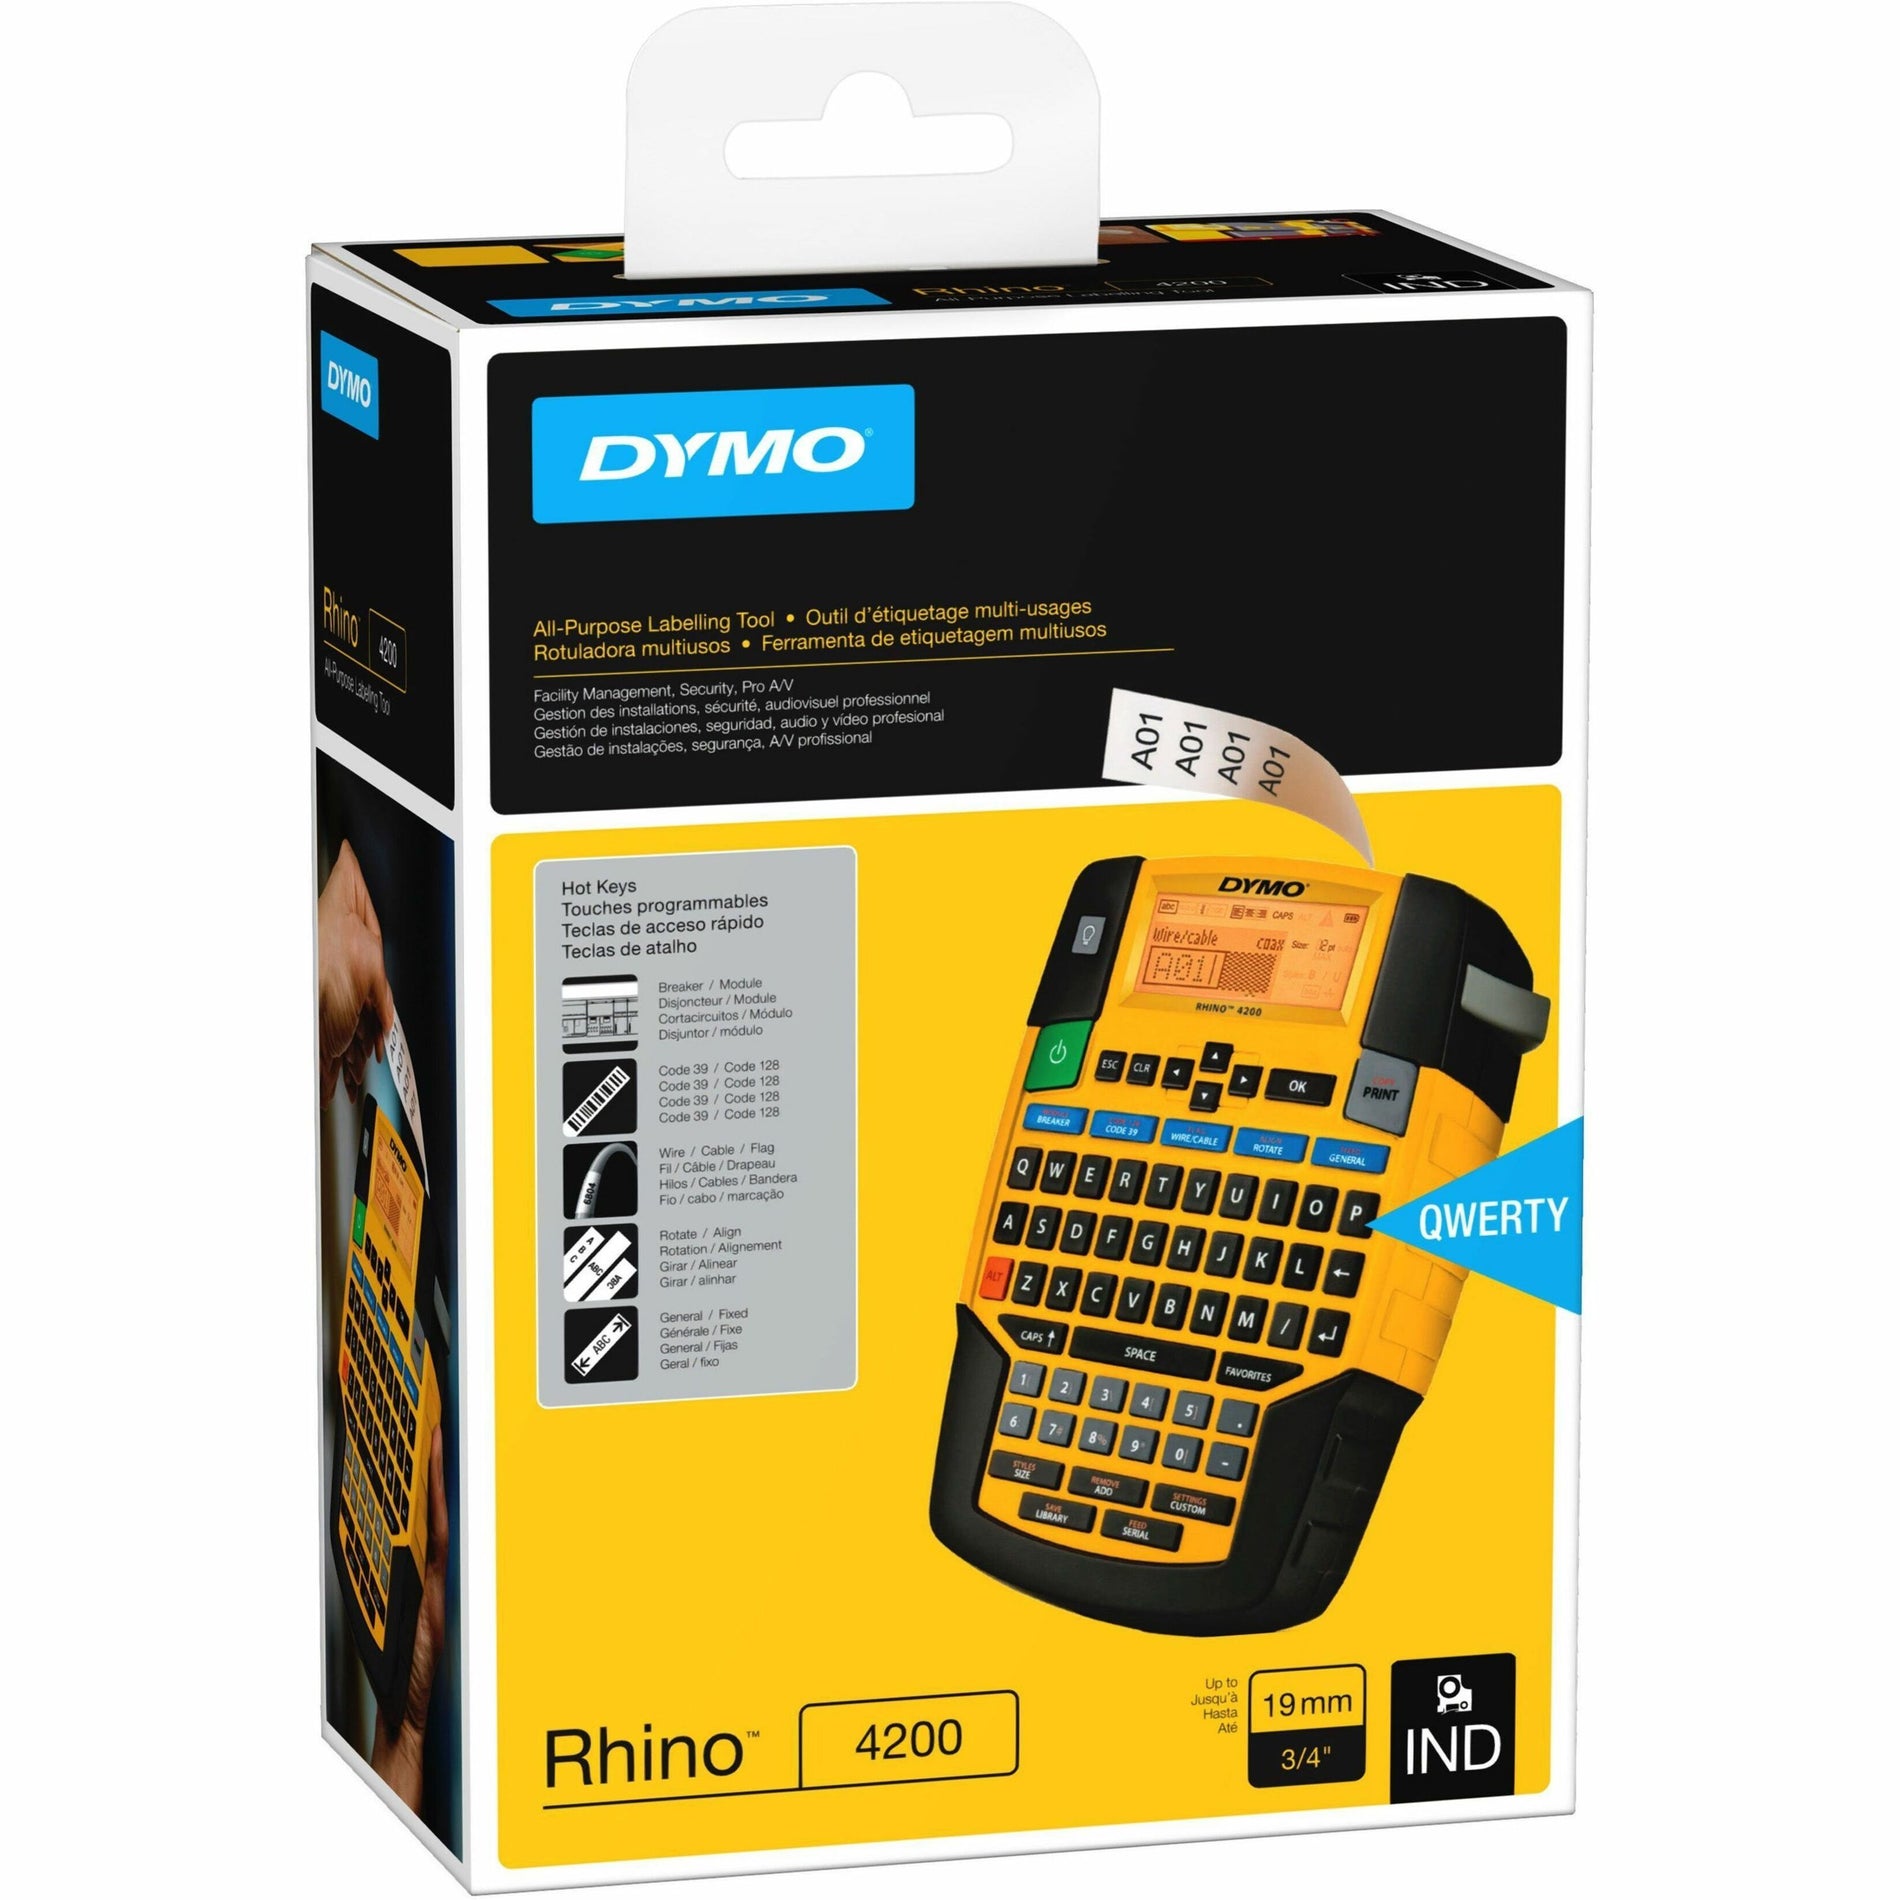 Dymo 2175088 Rhino 4200 Label Maker, Thermal Transfer, QWERTY, LCD Display, Battery Powered